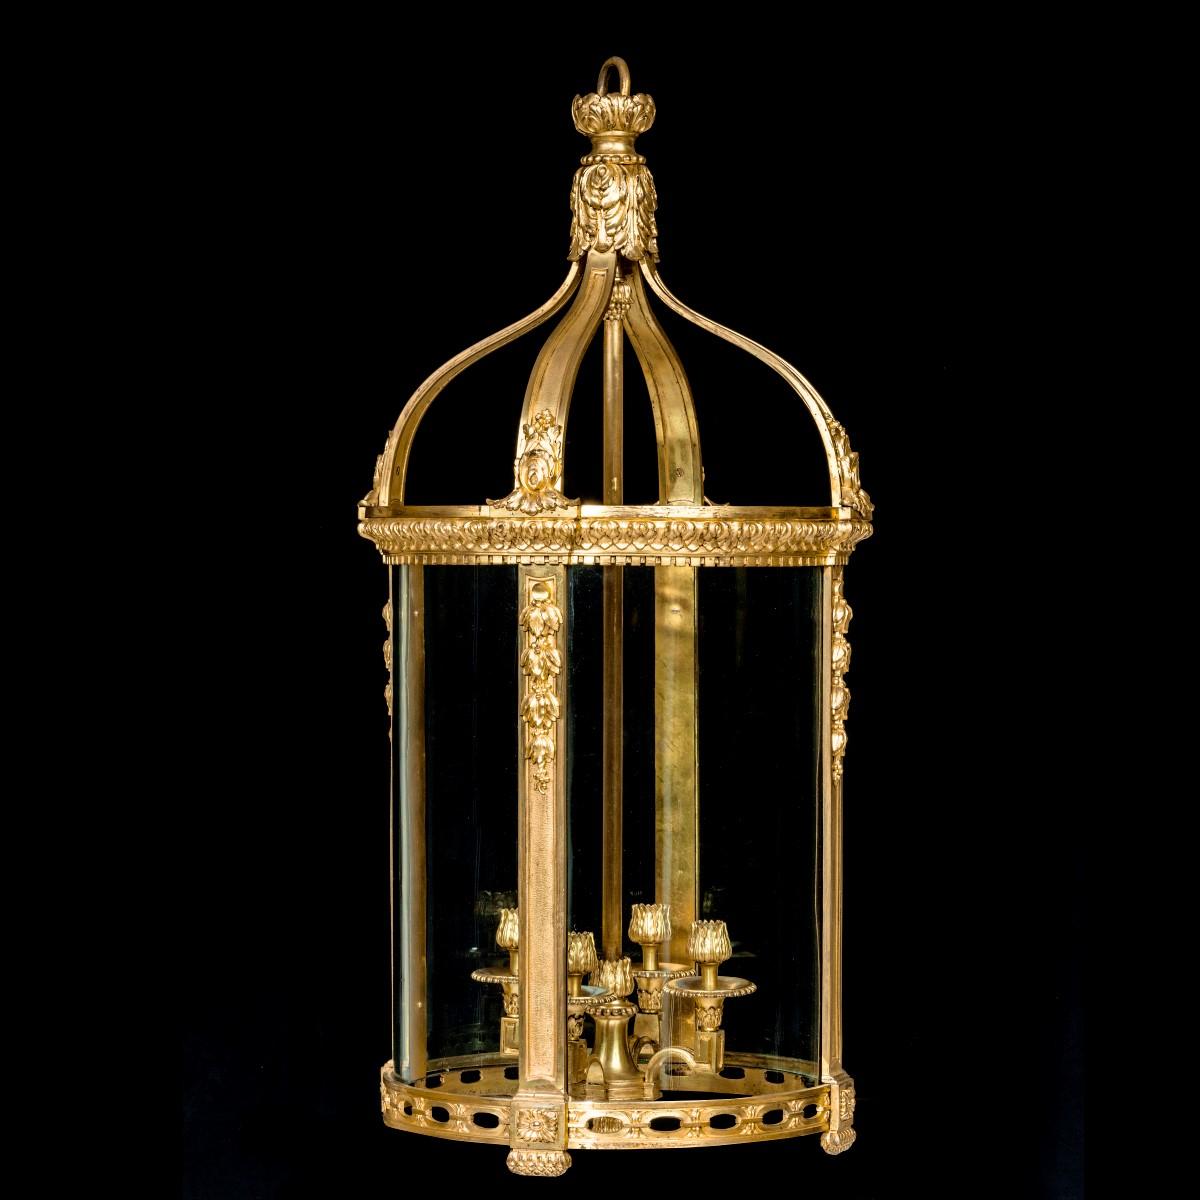 A French ormolu four-light lantern, of cylindrical form with four uprights embellished with pendant husks which curve into a central acanthus leaf terminal, the socles also in the form of acanthus buds. Circa 1880.